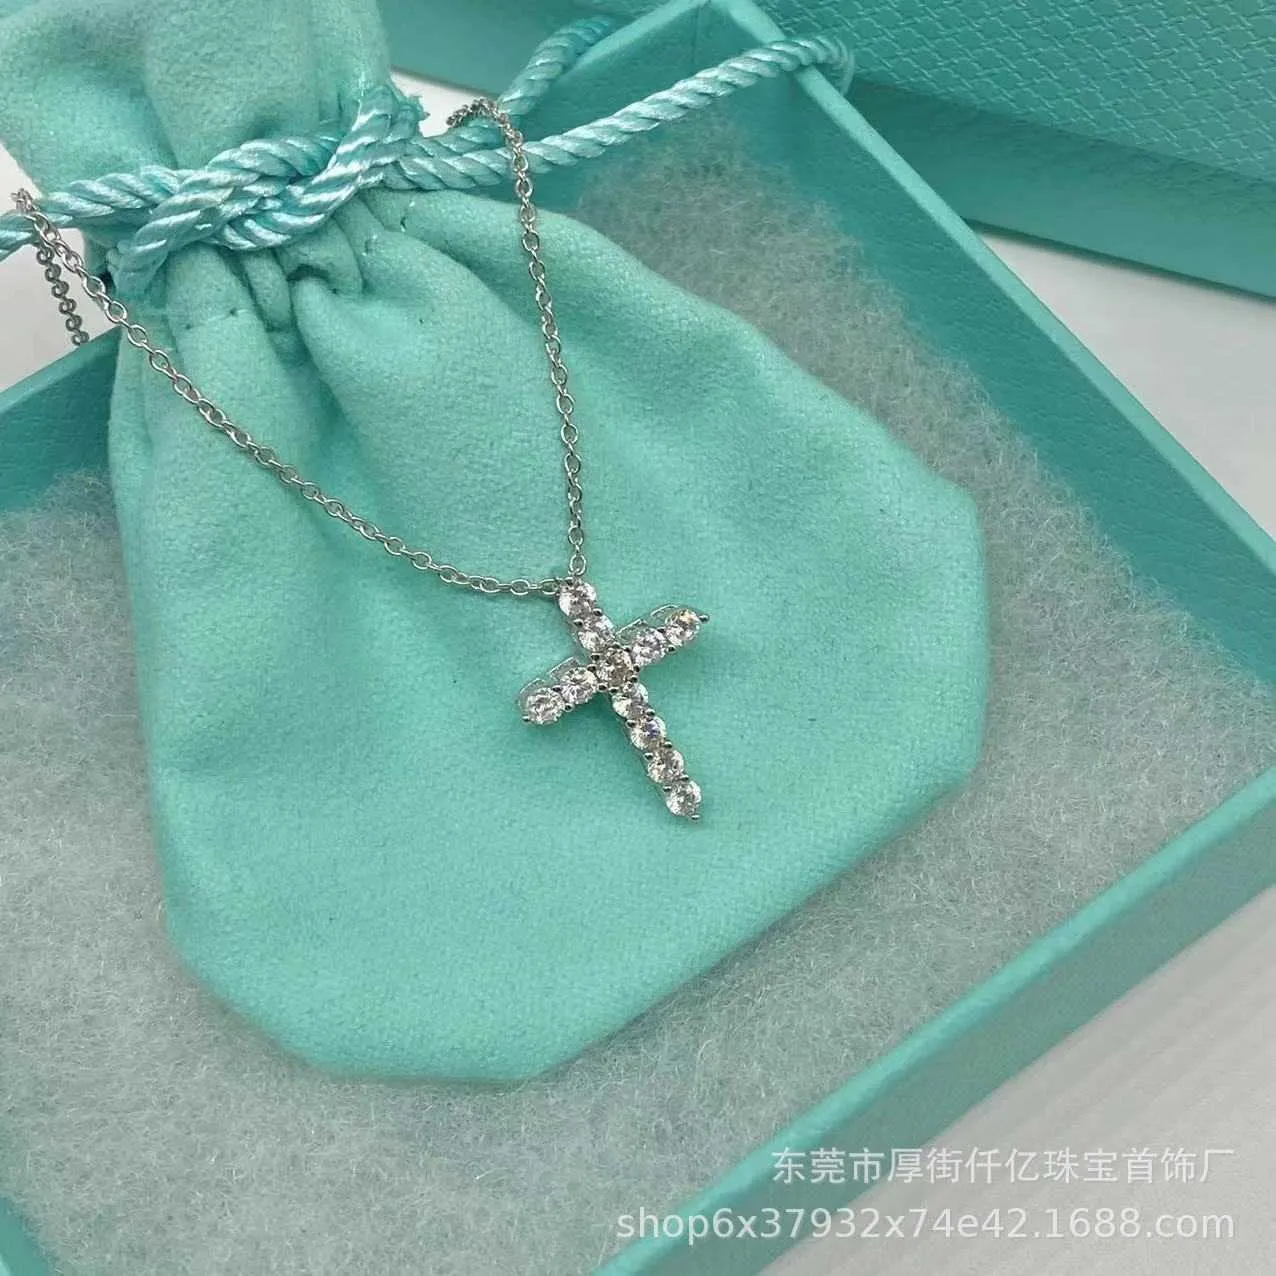 Designer Brand Tiffayss high-end cross studded diamond s925 sterling silver necklace fashionable and simple light luxury collarbone chain